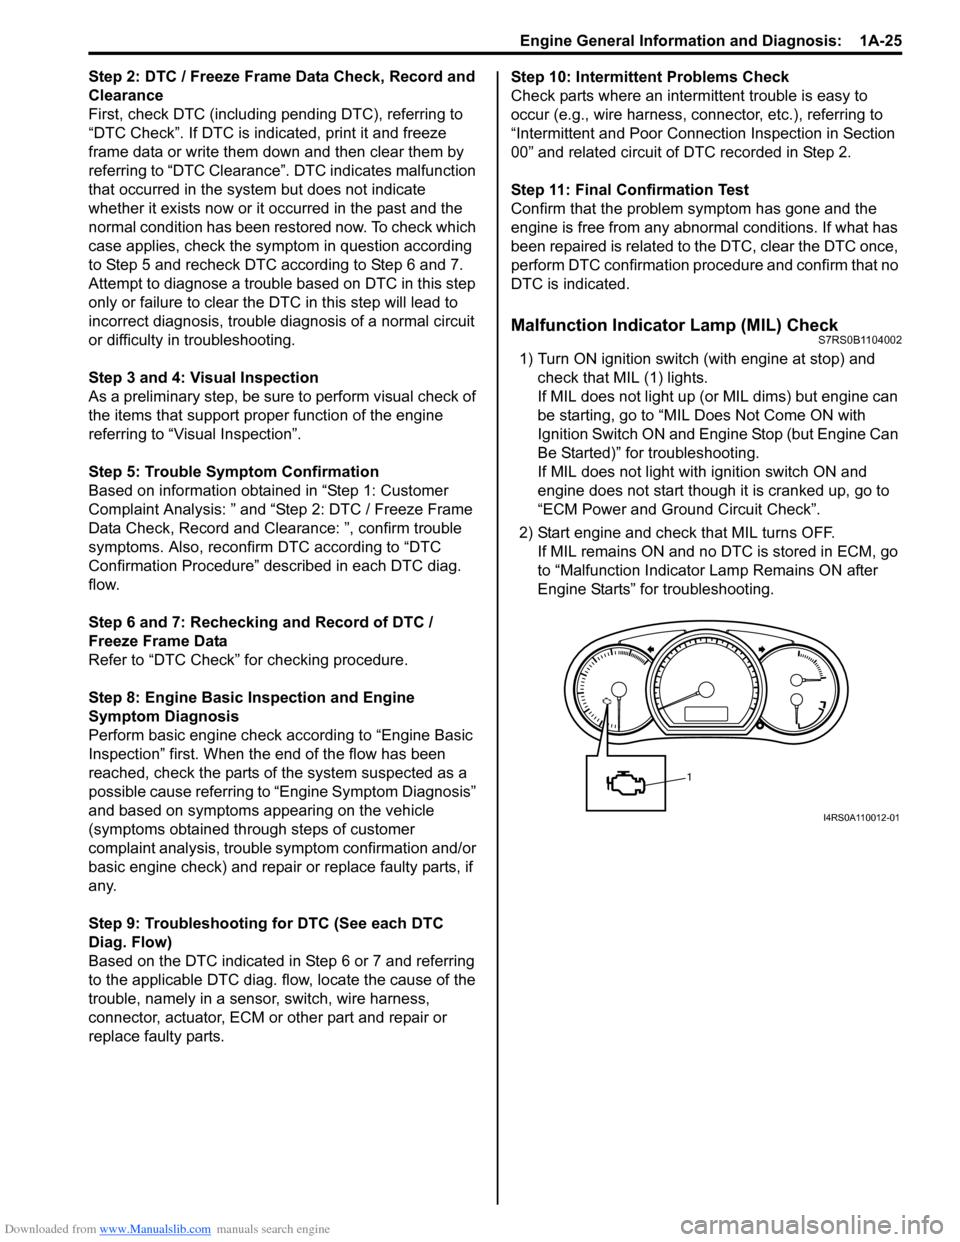 SUZUKI SWIFT 2005 2.G Service Workshop Manual Downloaded from www.Manualslib.com manuals search engine Engine General Information and Diagnosis:  1A-25
Step 2: DTC / Freeze Frame Data Check, Record and 
Clearance
First, check DTC (including pendi